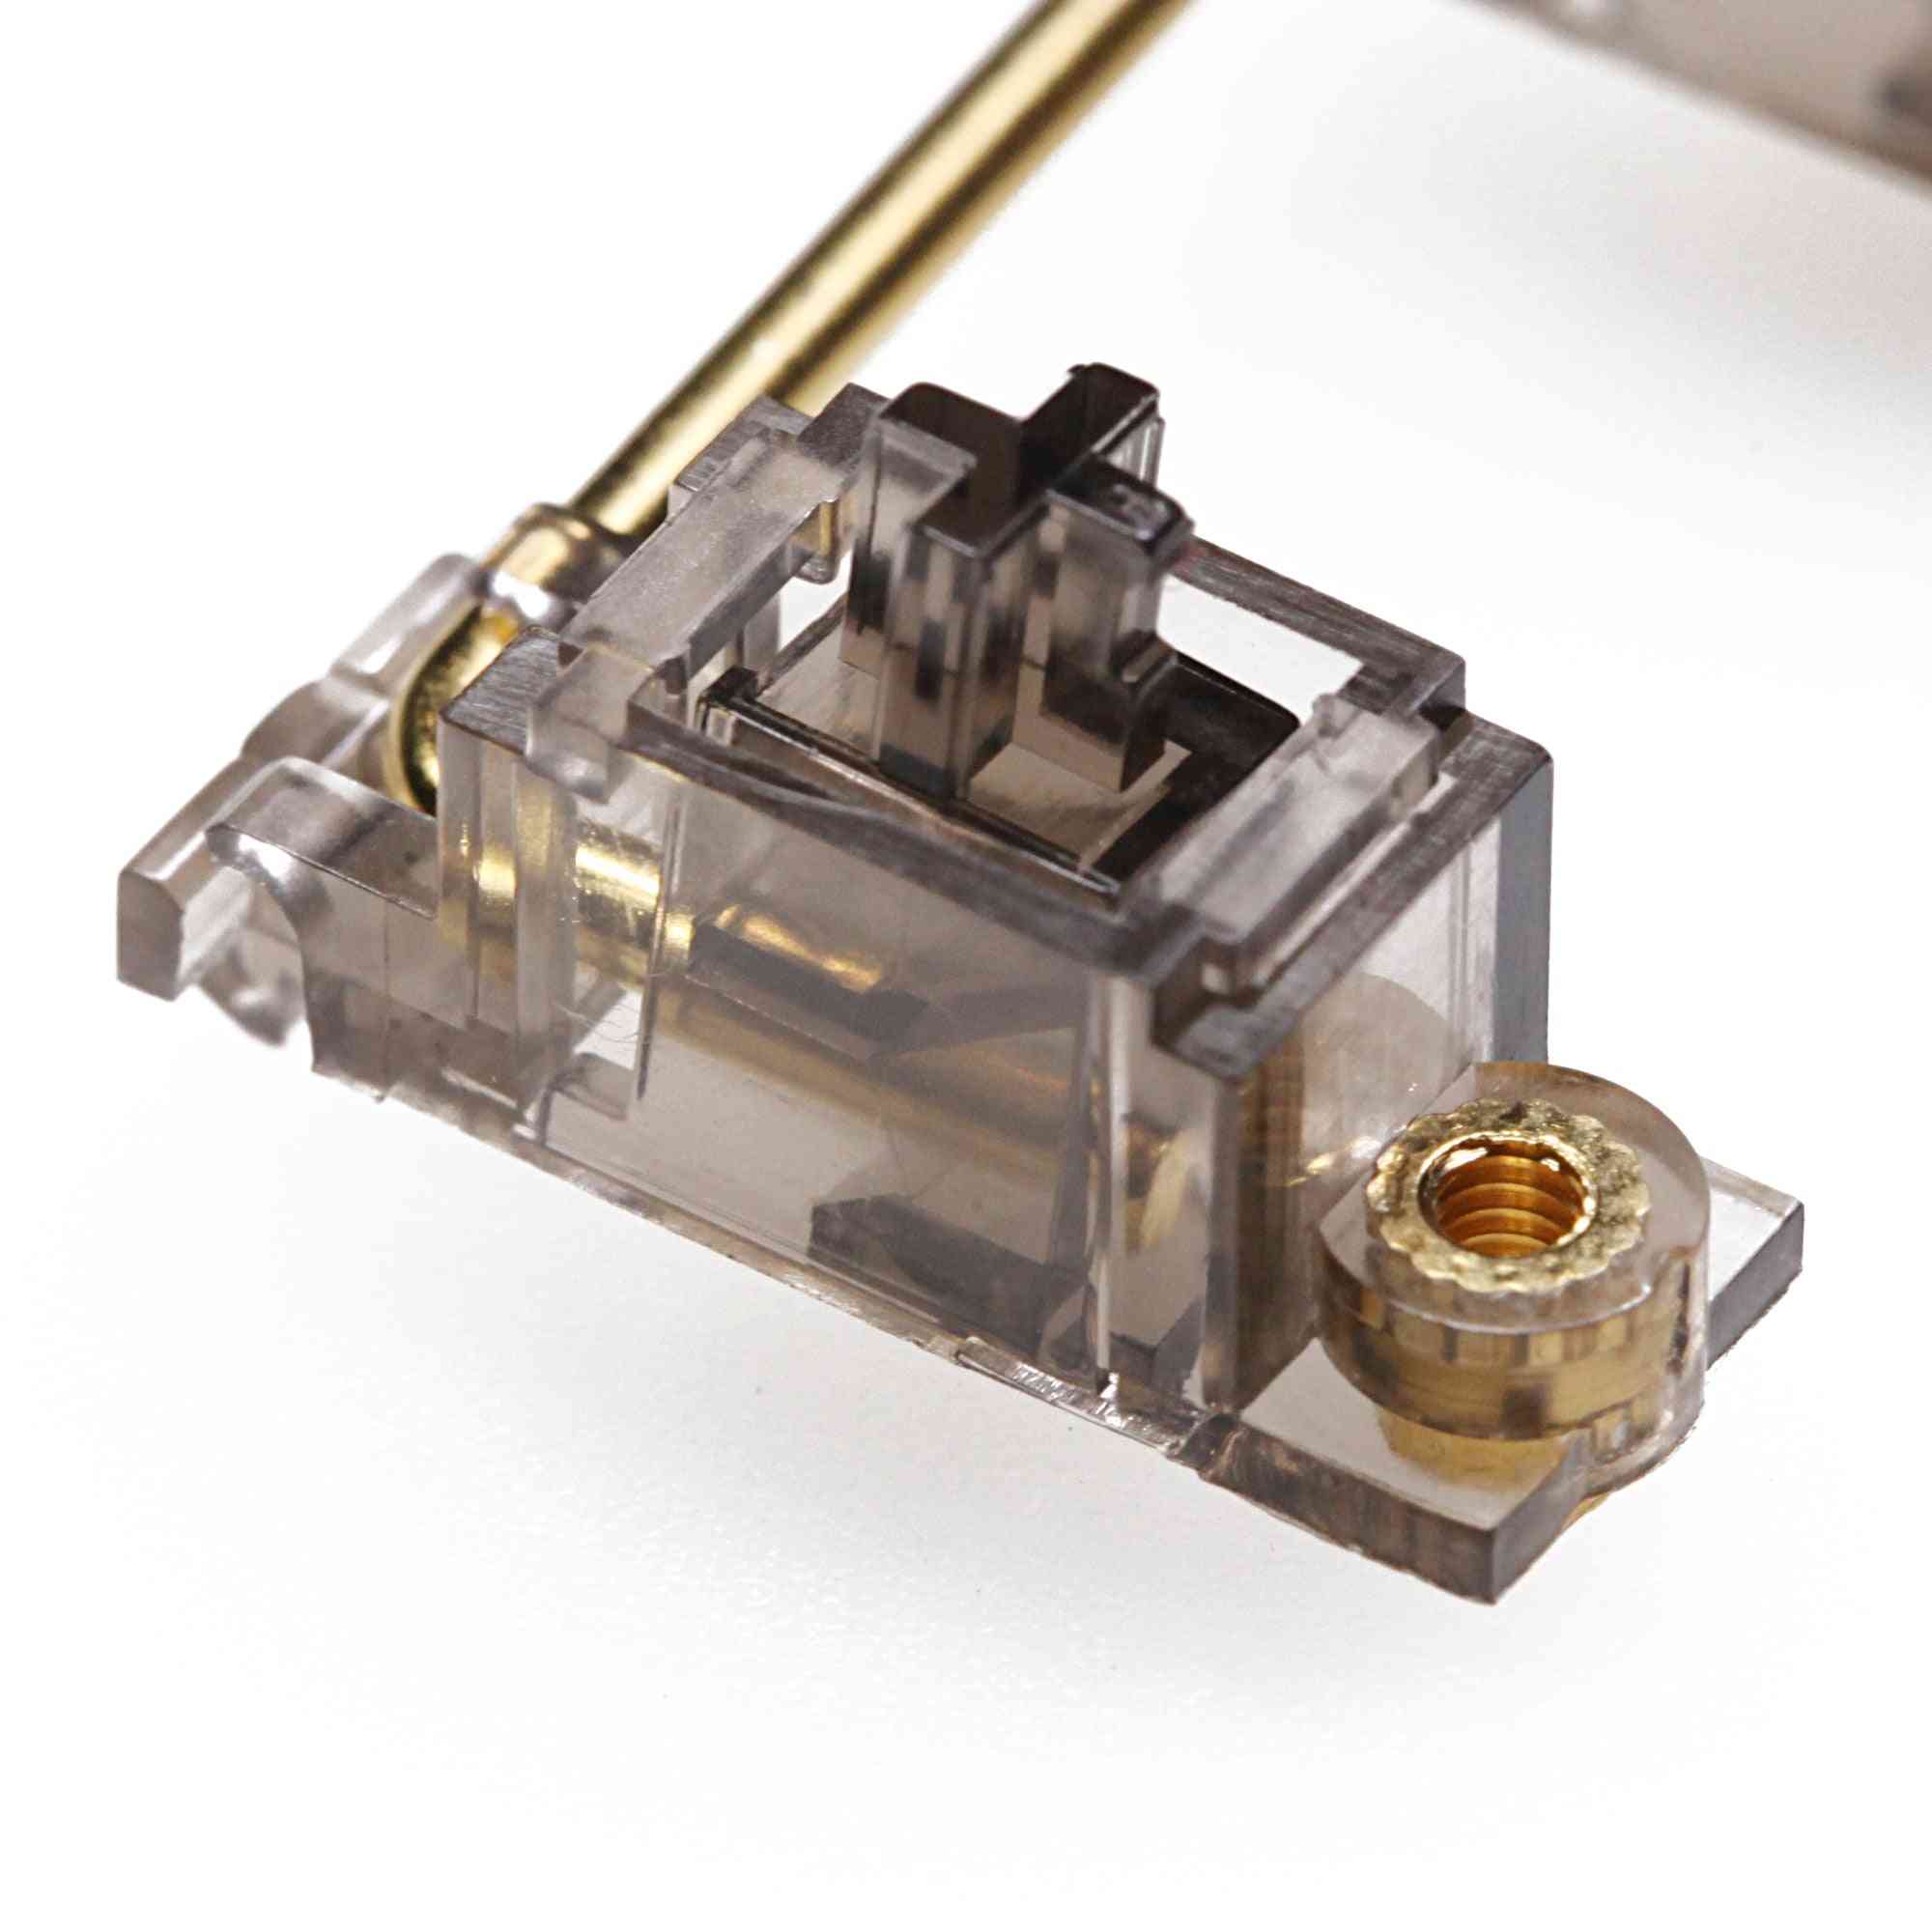 Everglide Transparent Pcb Screw In Stabilizer For Custom Mechanical Keyboard